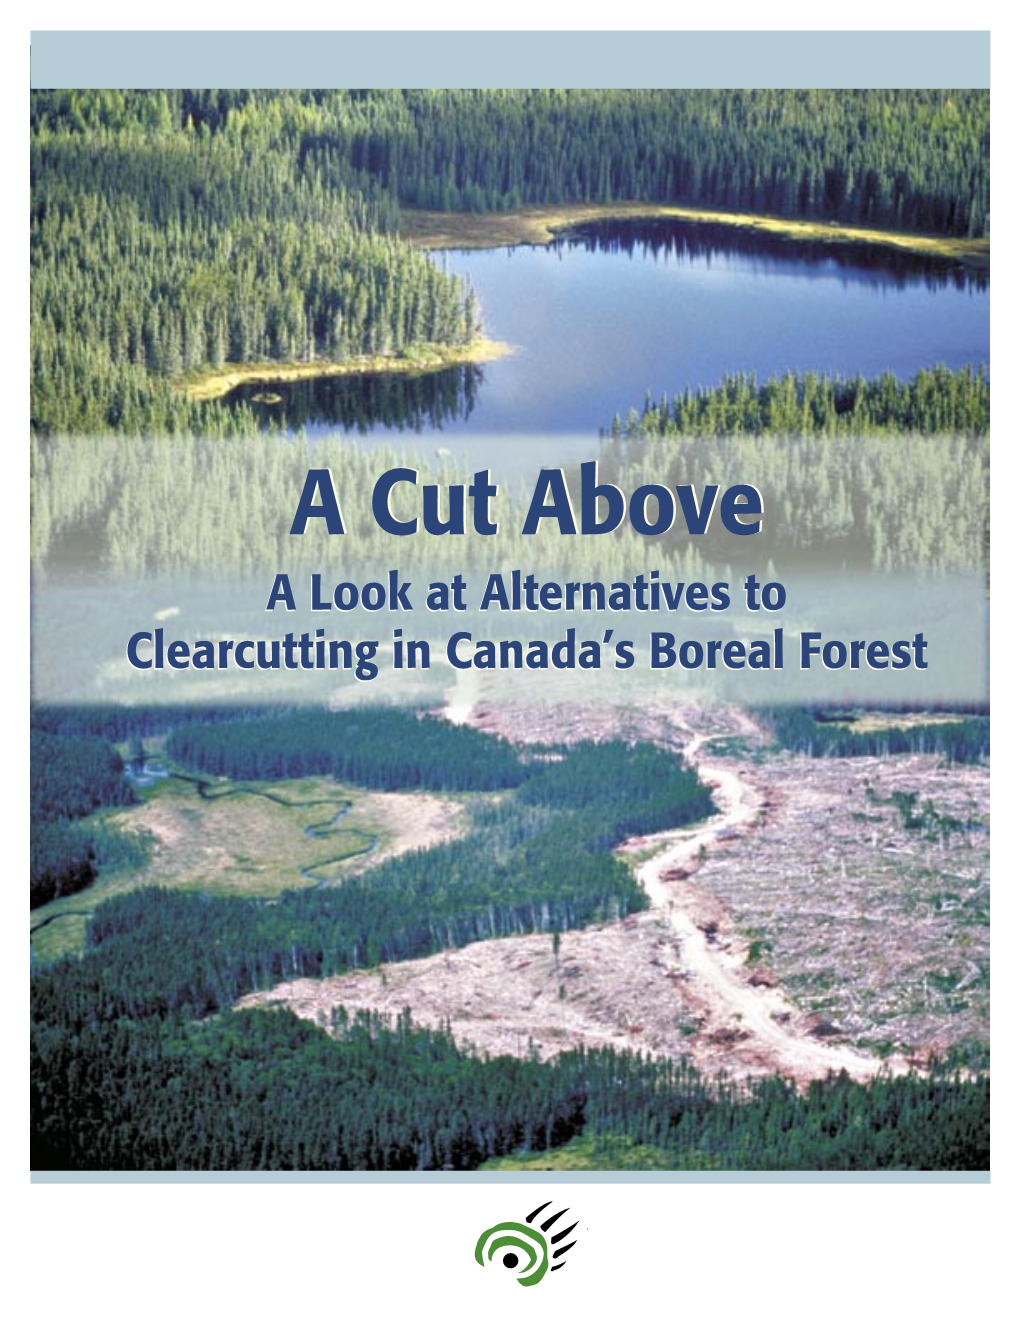 A Cut Above: a Look at Alternative to Clearcutting in the Boreal Forest